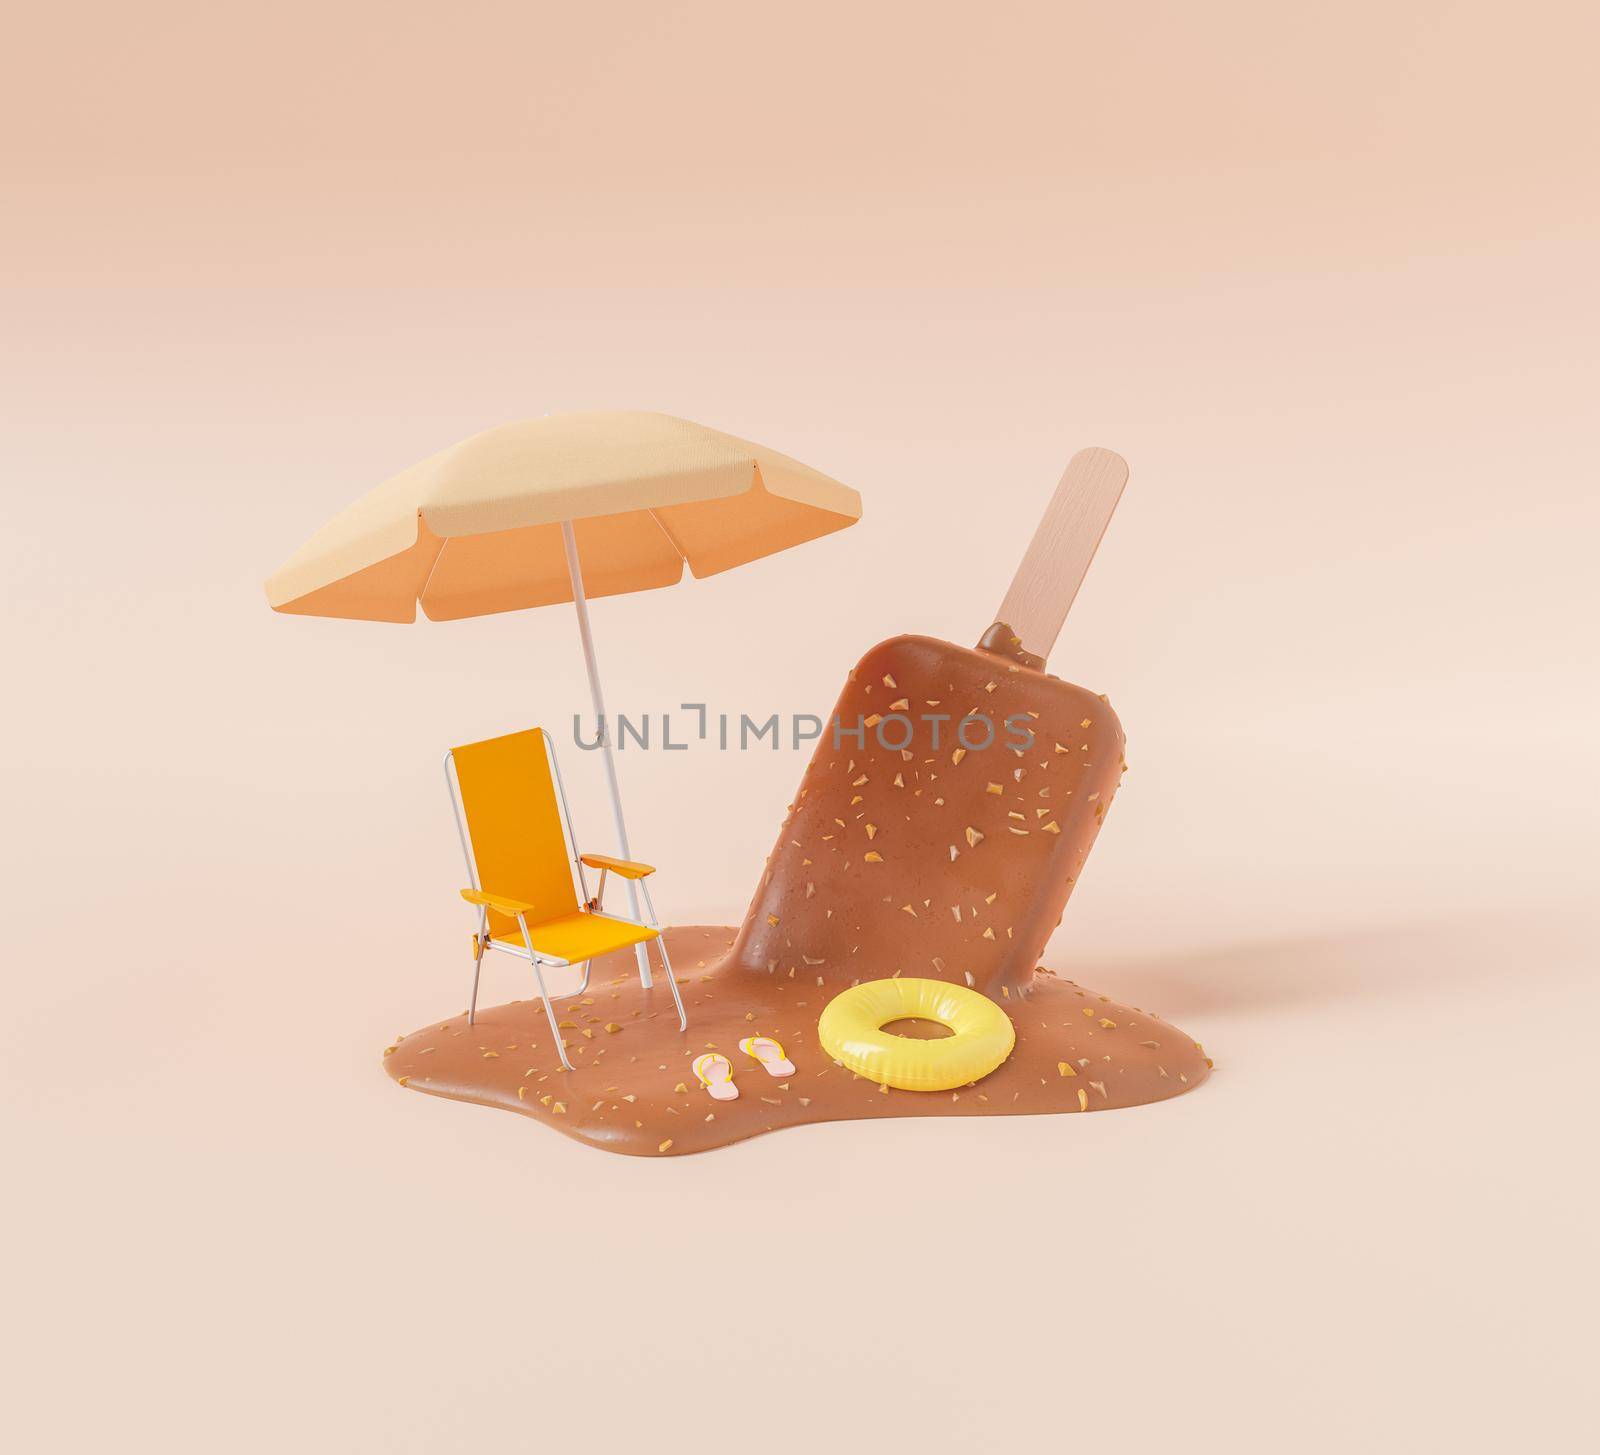 Beach supplies on melted ice cream by asolano